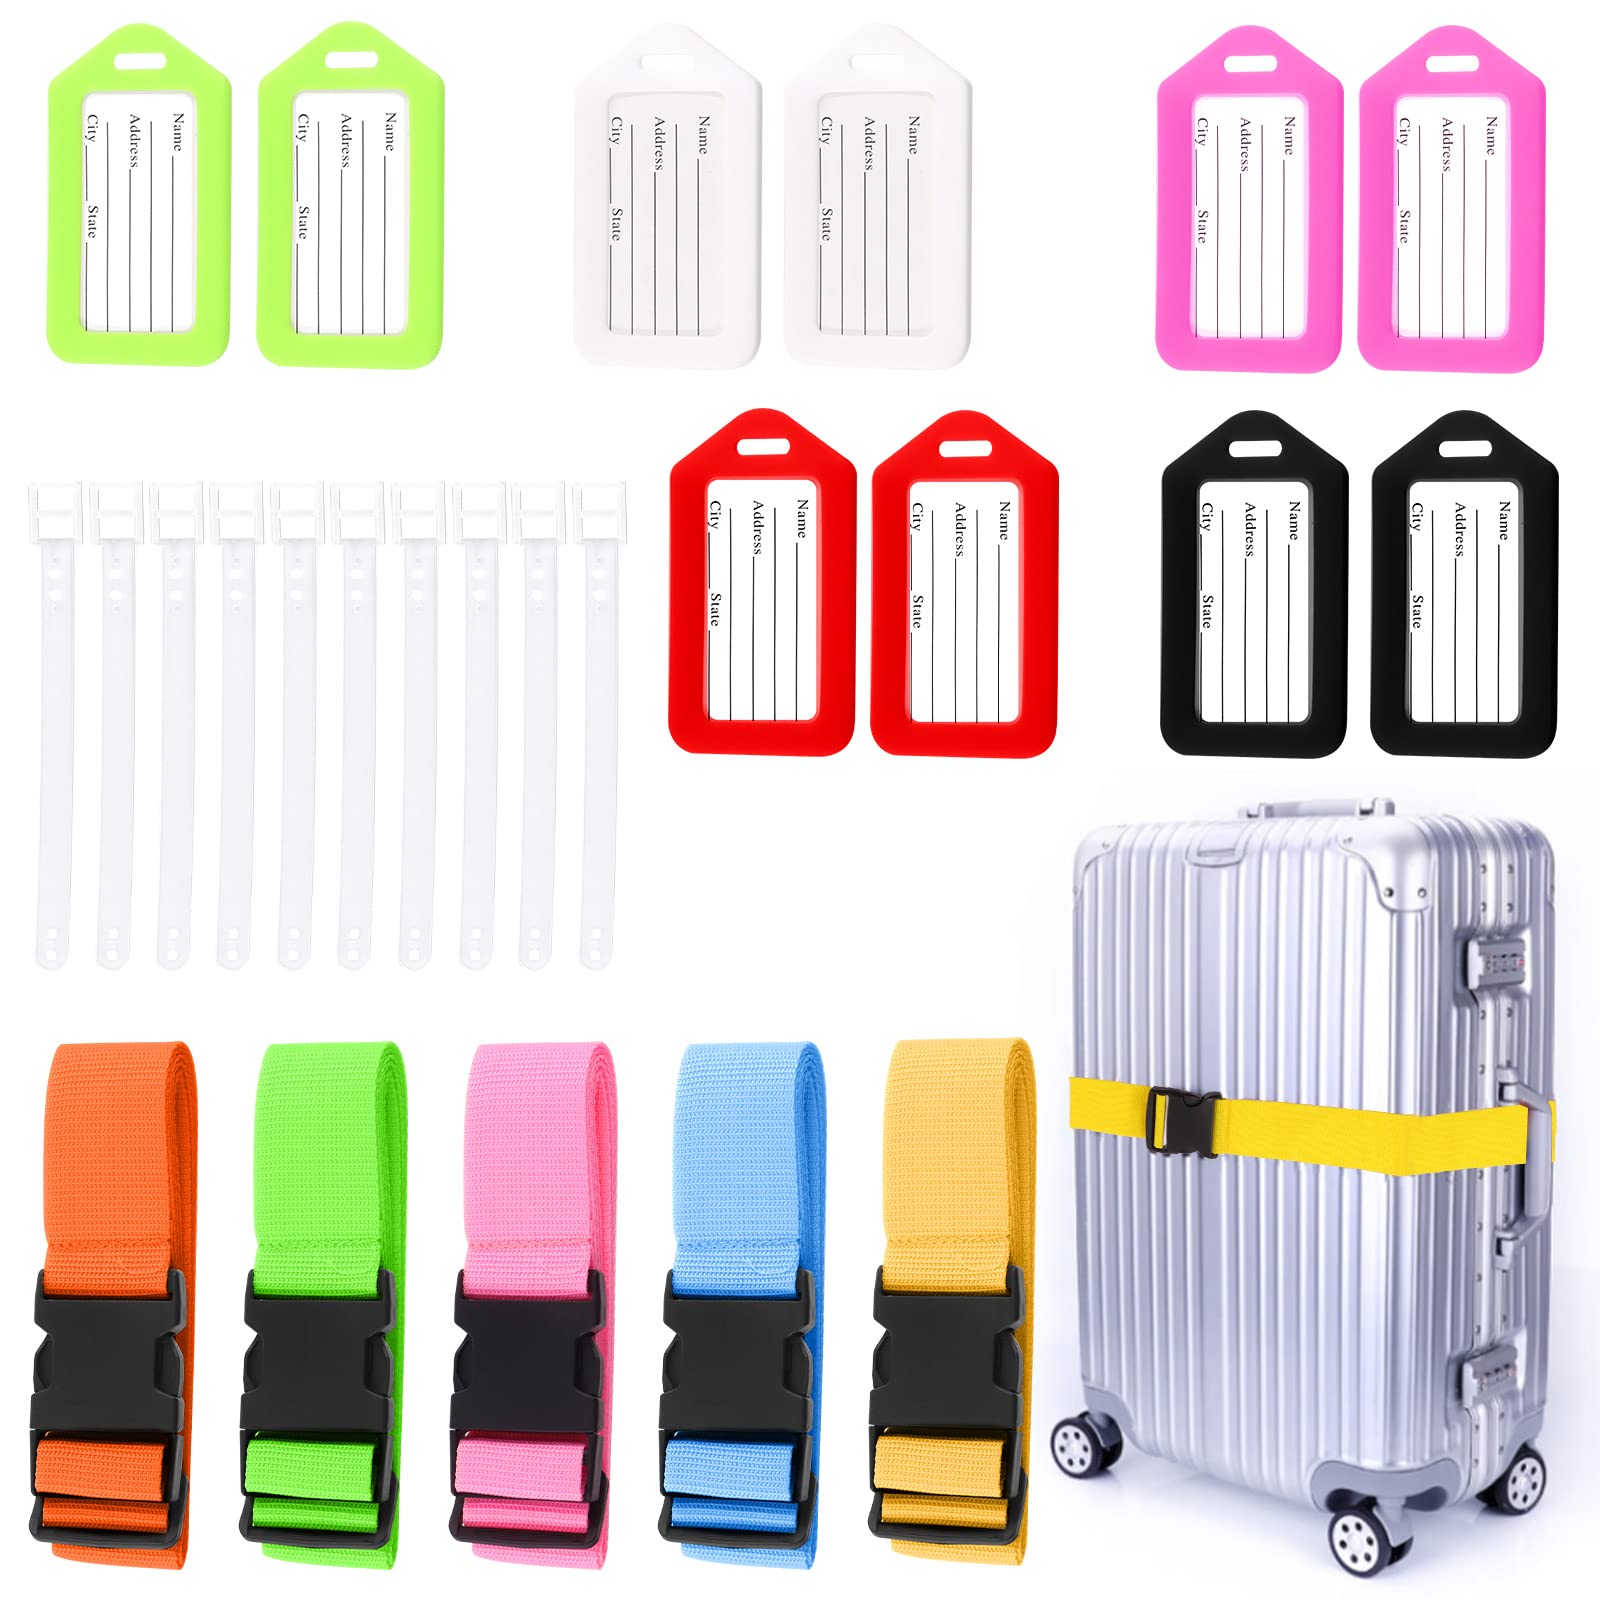 Mardatt 25Pcs Suitcase Accessories for Travel Includes 5 Colors Luggage Straps, Plastic Luggage Tags with Lanyard, Luggage Straps Suitcase Belt Travel Accessories for Traveling (Assorted Colors) von Mardatt